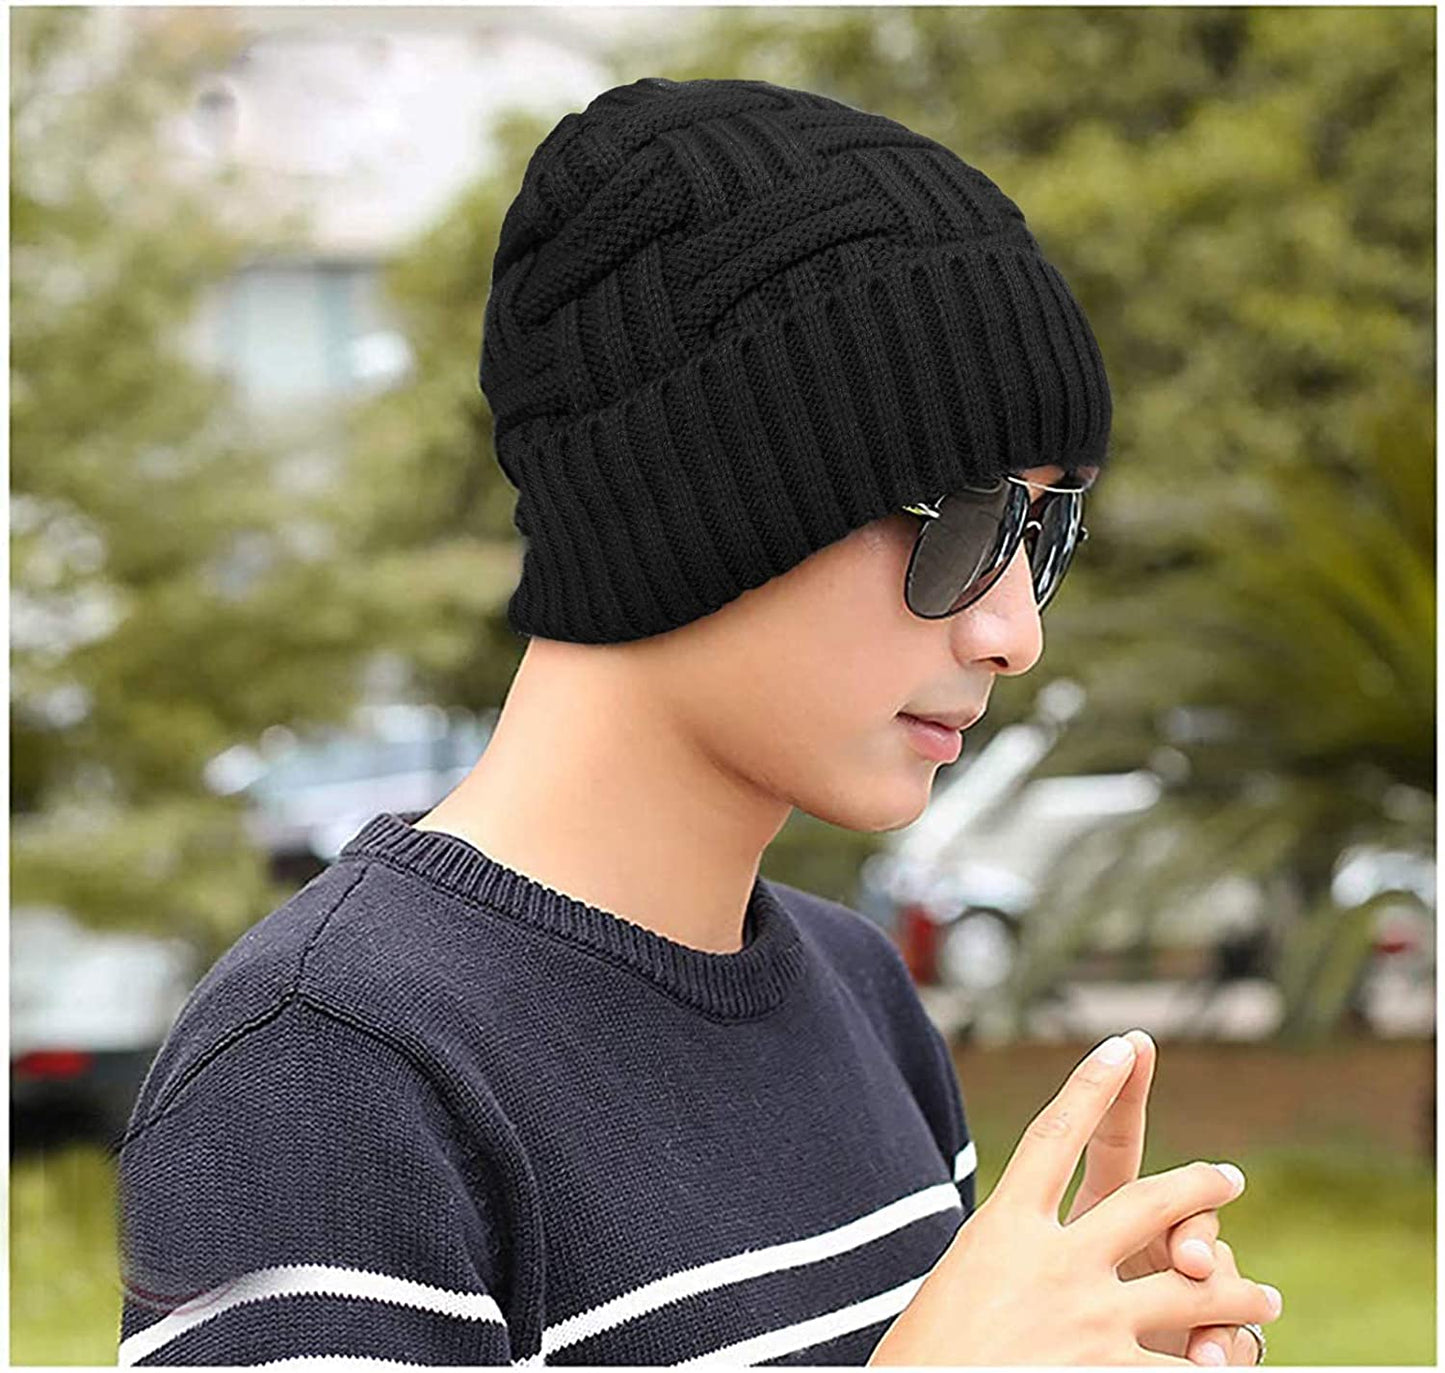 Winter Hat Warm Knitted Wool Thick Baggy Slouchy Beanie Skull Cap